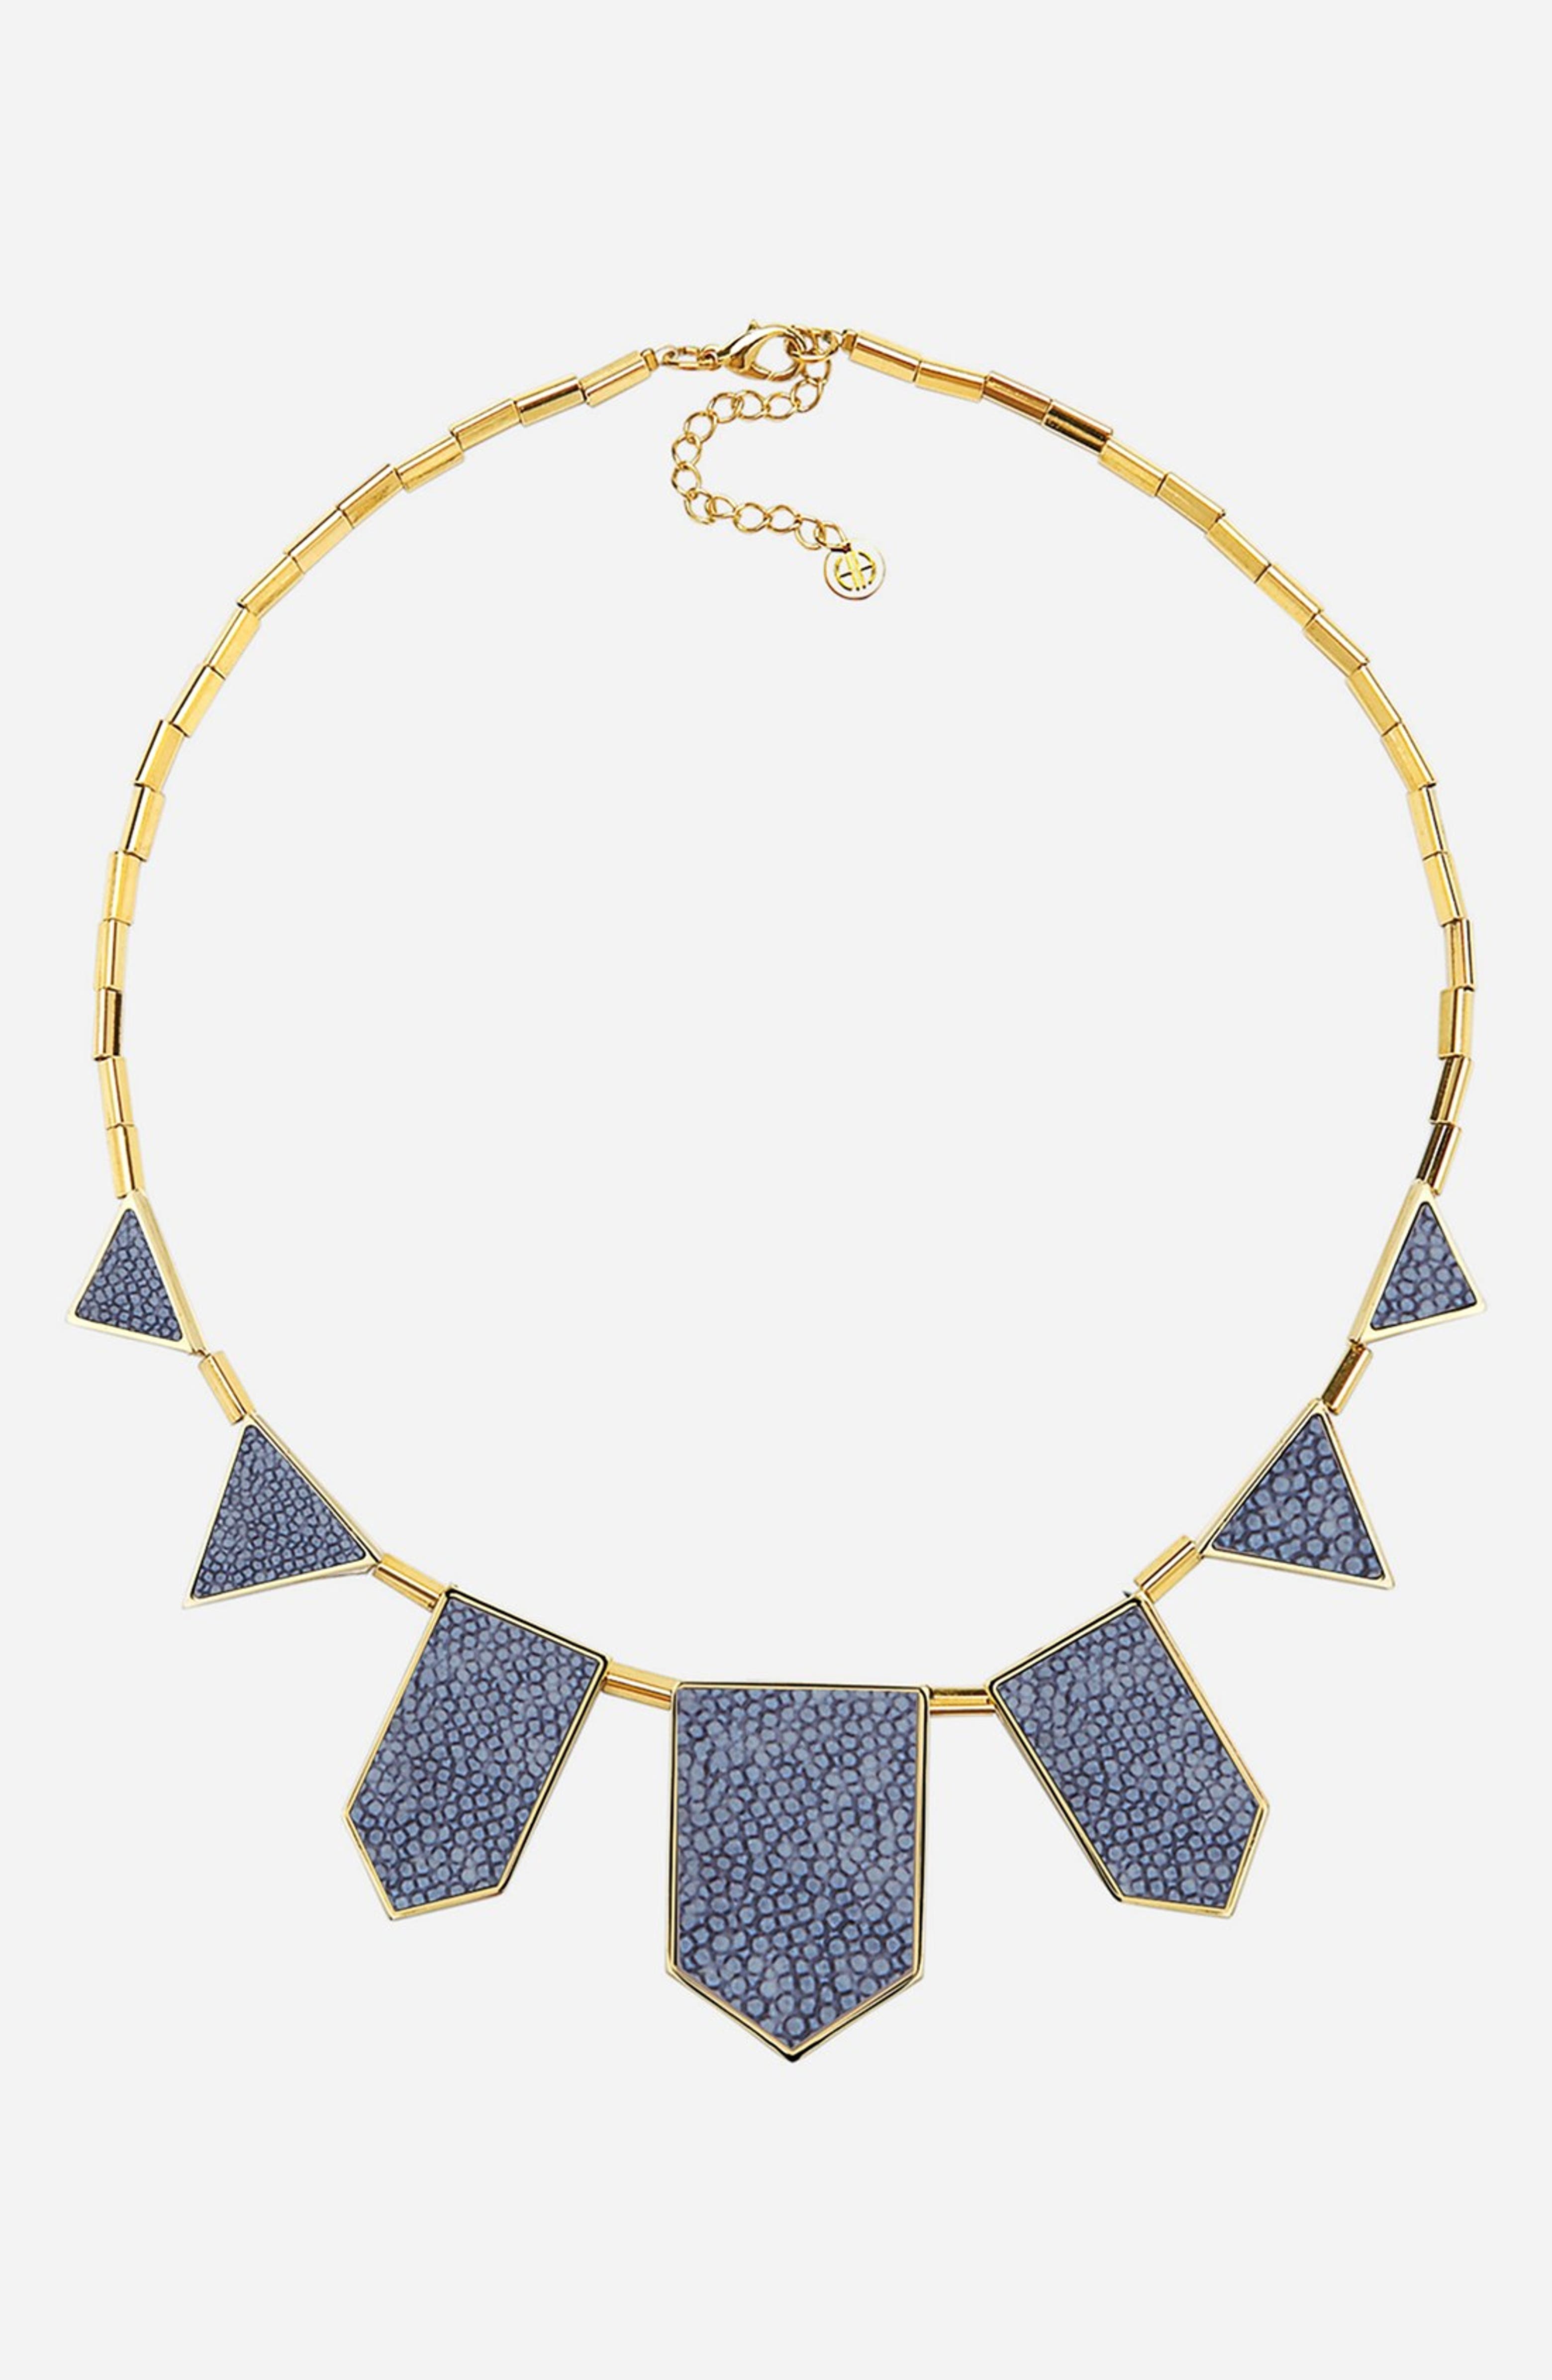 House of Harlow 1960 'Blue Star' Statement Necklace | Nordstrom